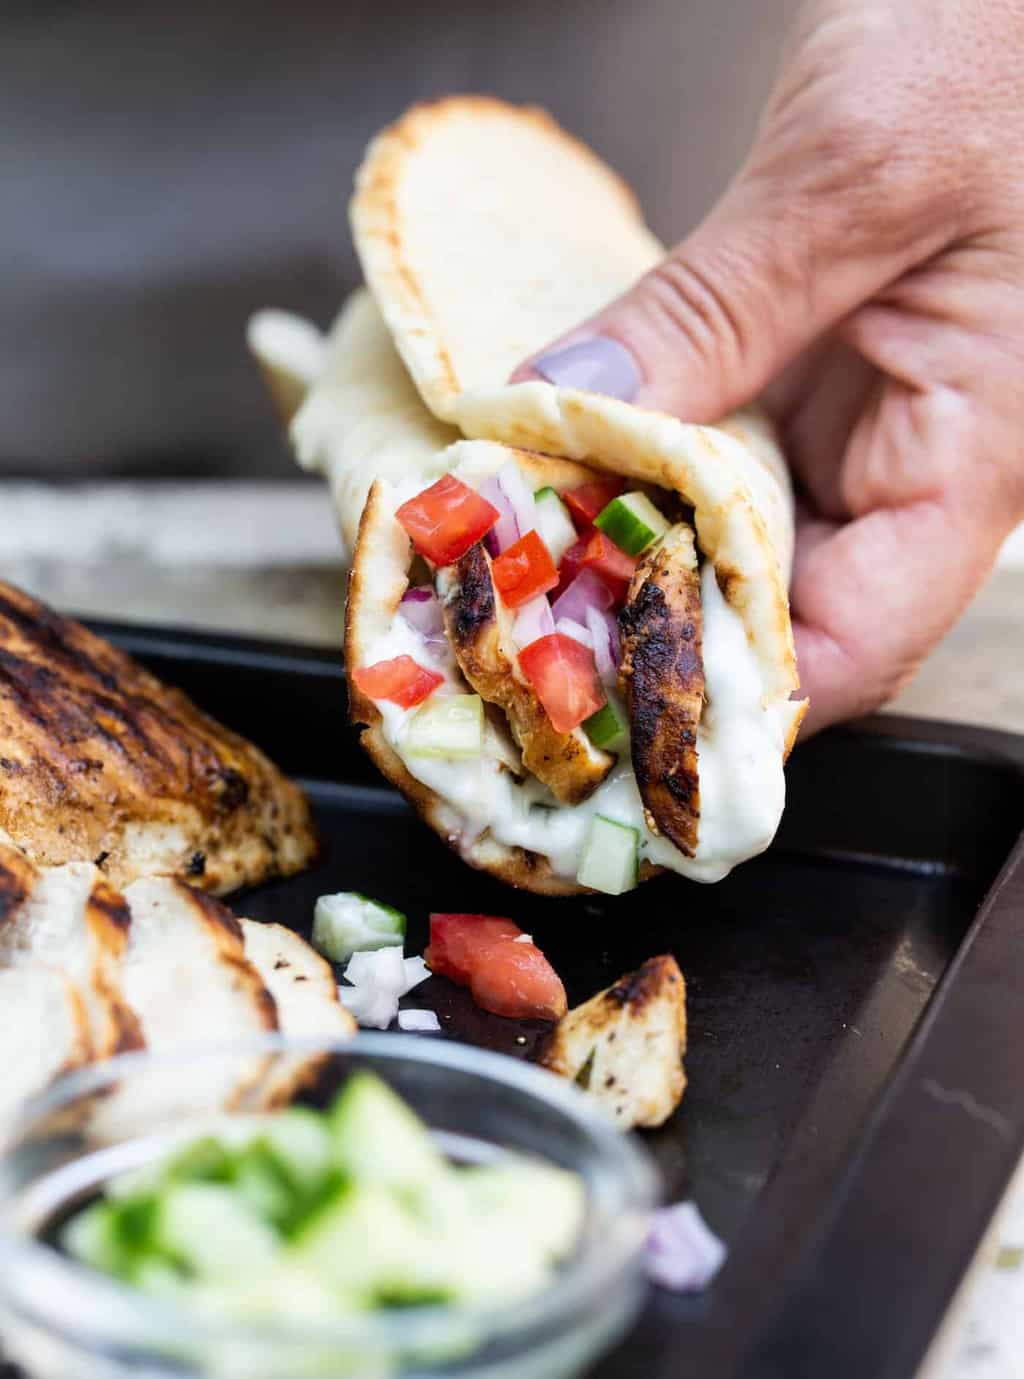 Close up image of hand holding an assembled easy gilled chicken gyro.